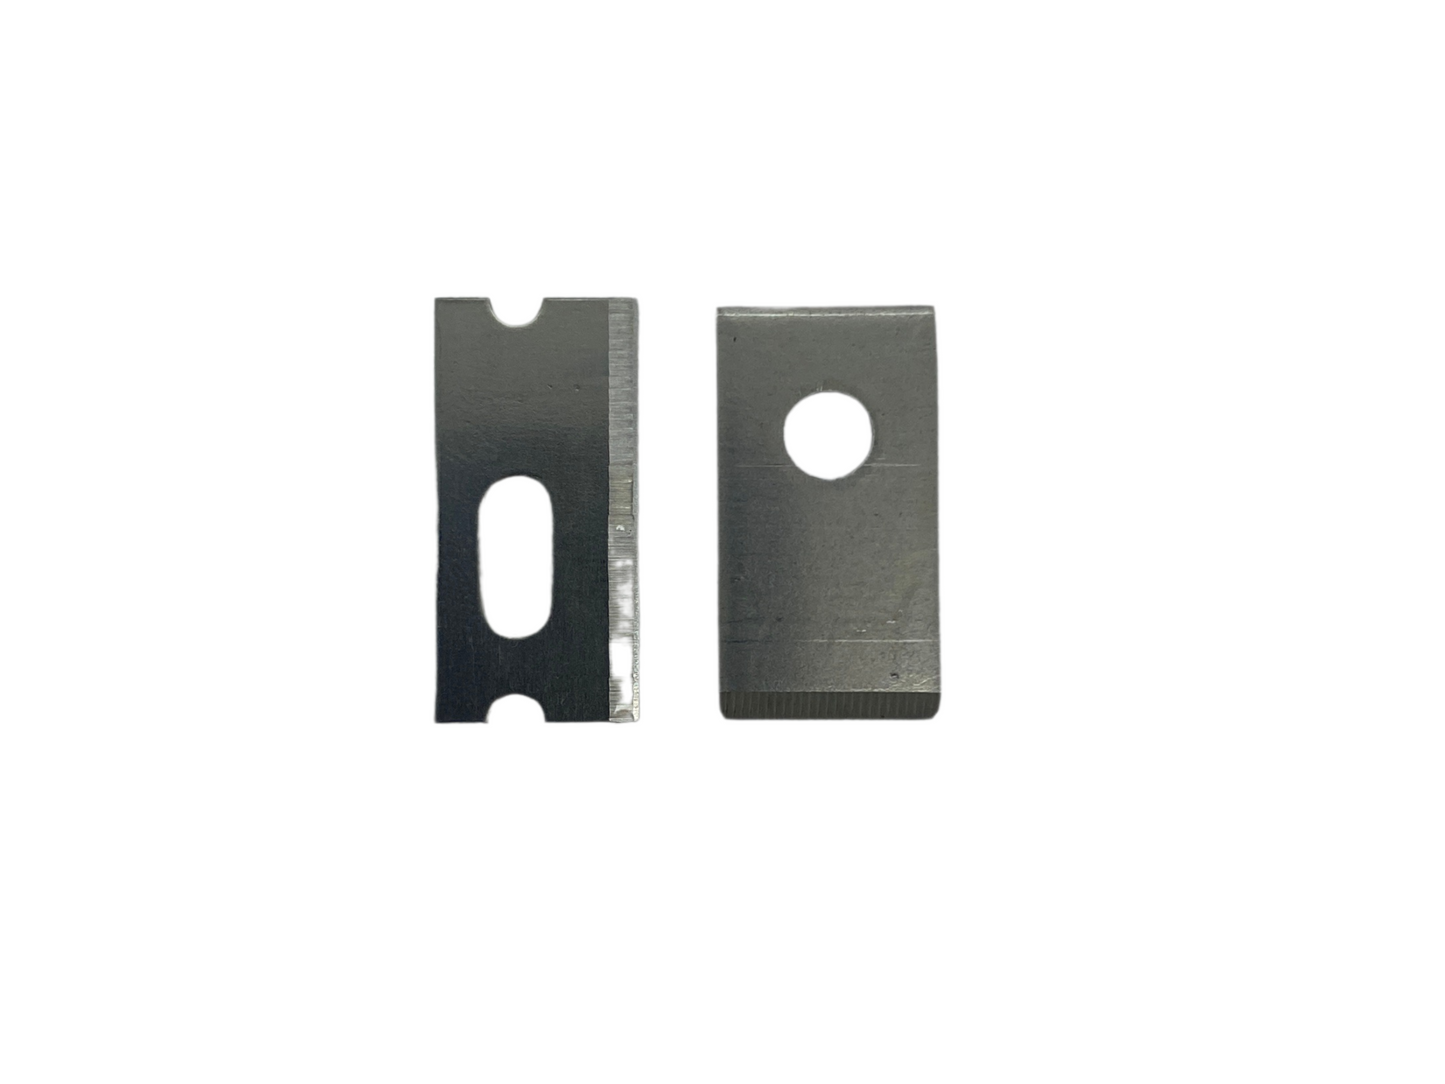 Spare Blades for TL22008 Contractor Grade Ratchet Crimp Tool Cutting Blade and Trimming Blade Pair